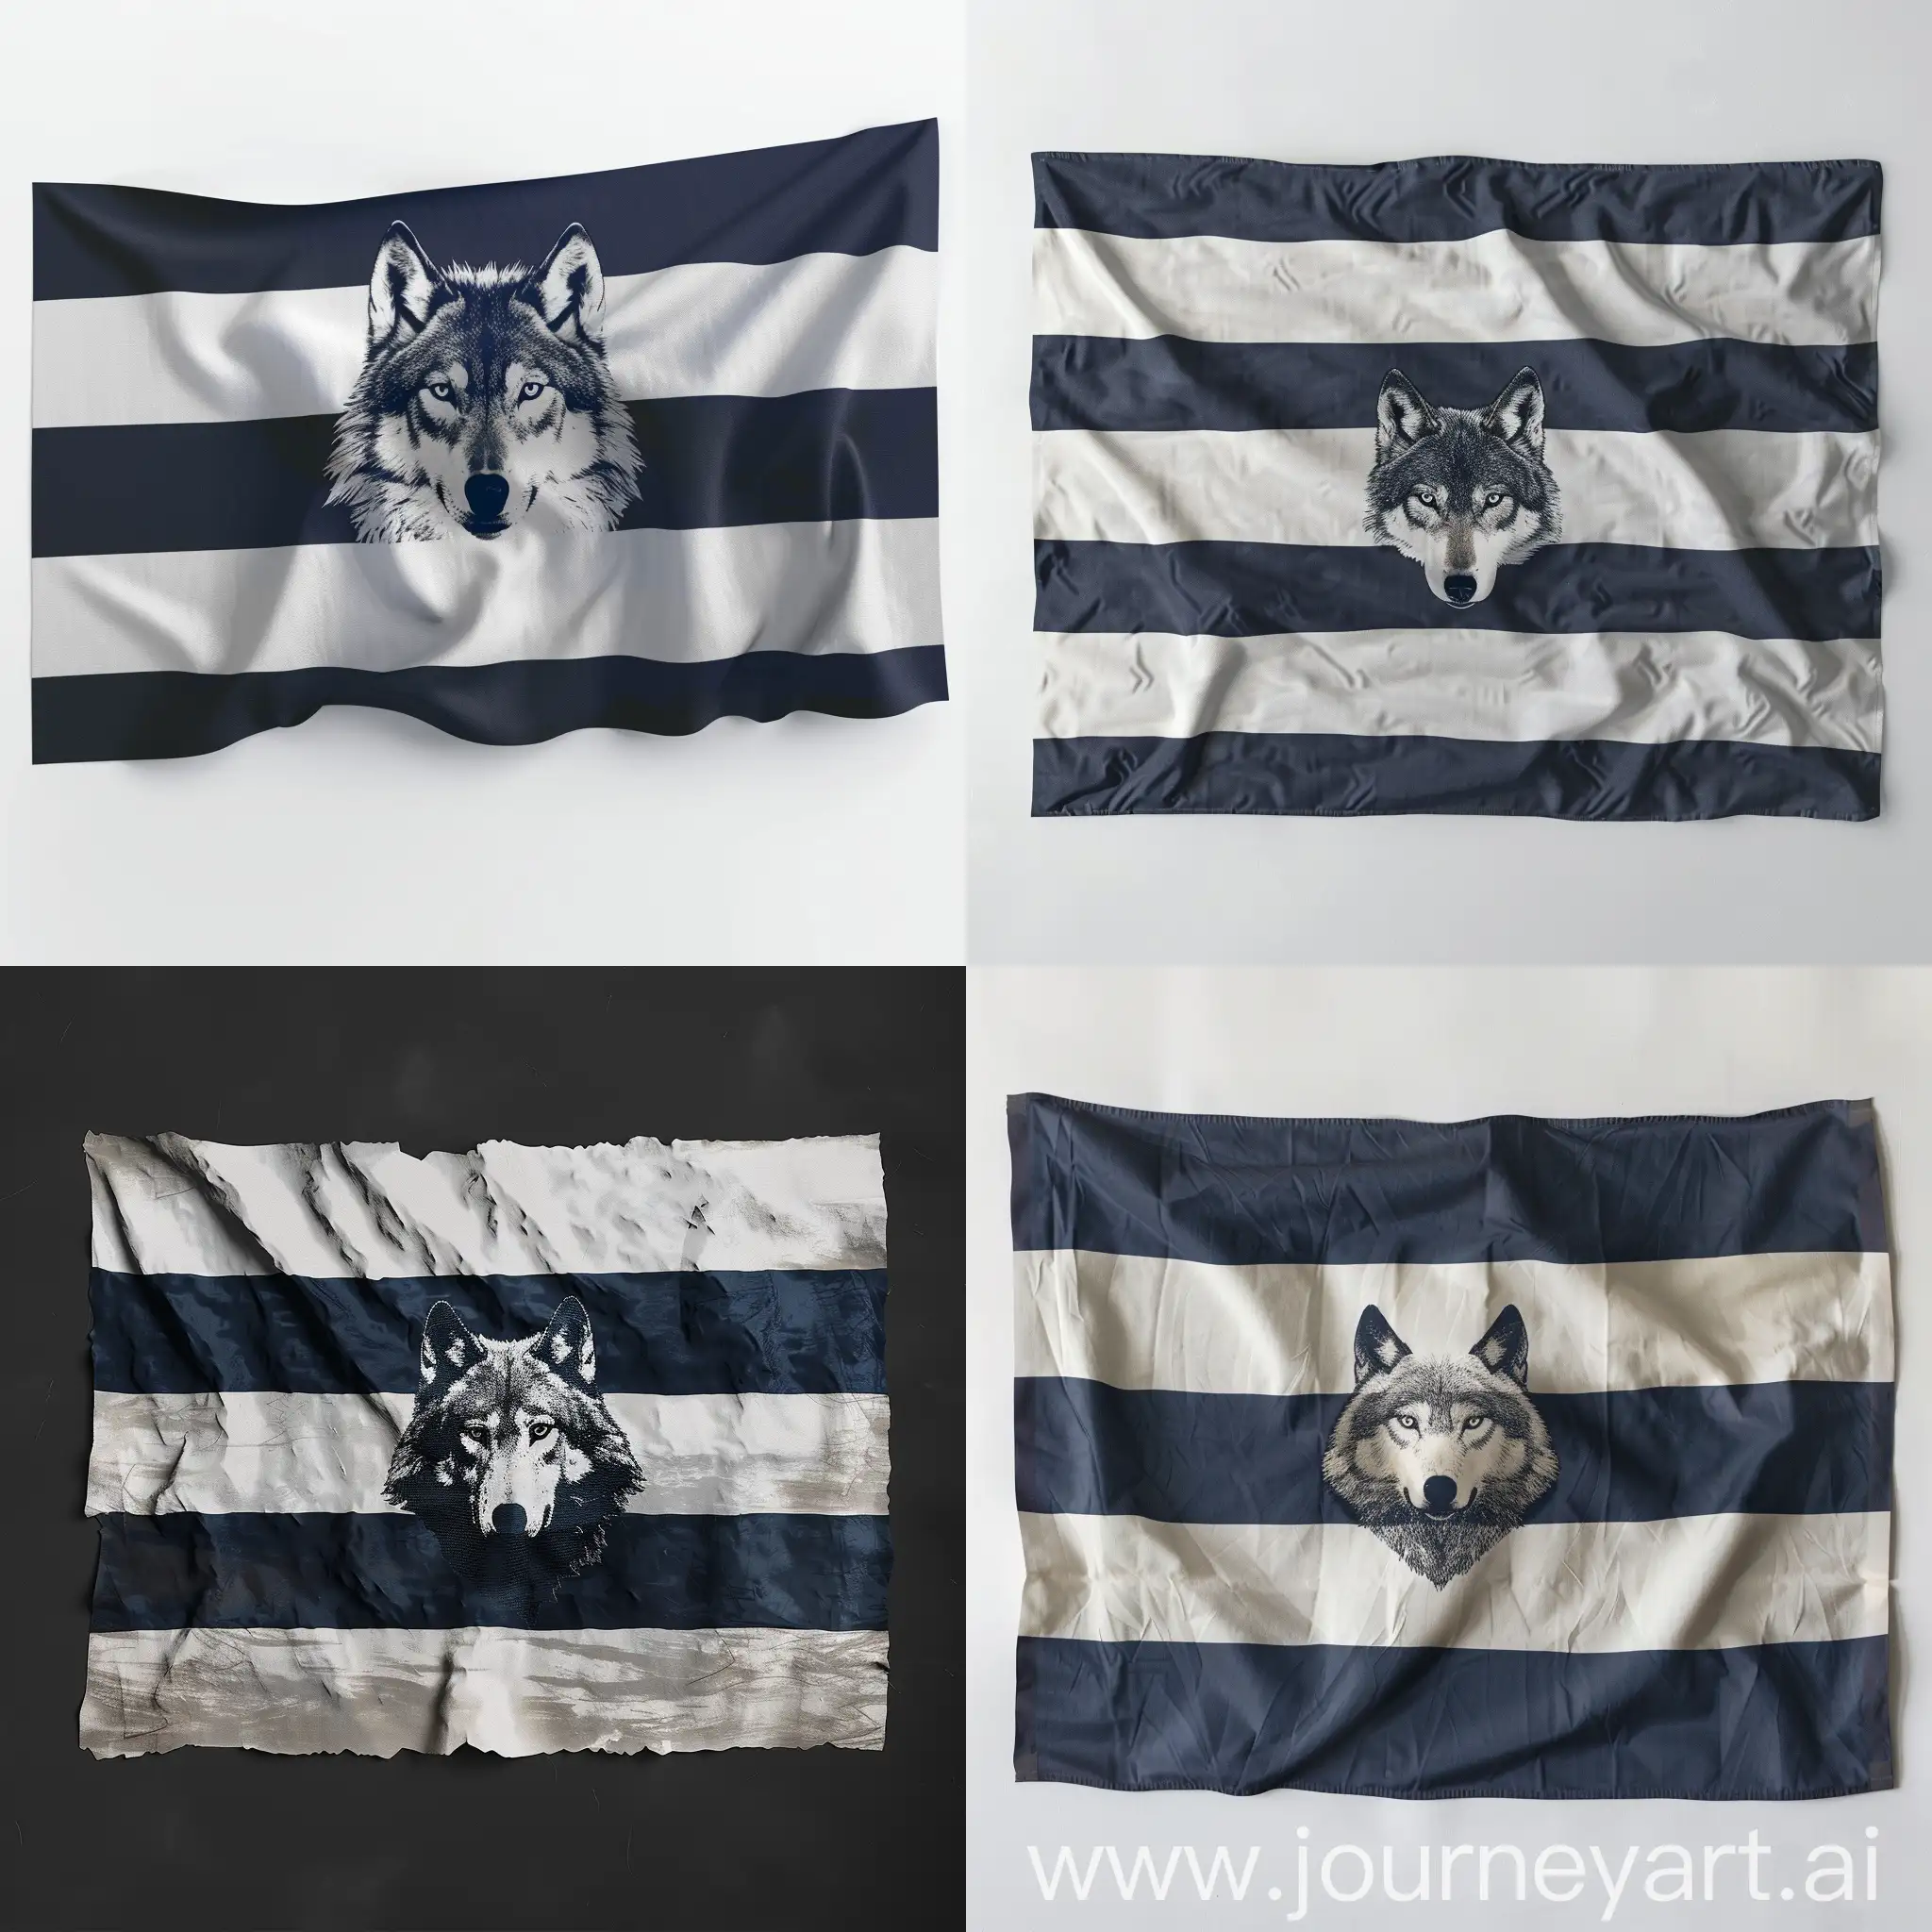 A waving flag with 3 horizontal stripes. The first one is white. The middle one is dark blue. The bottom one is white. In the middle of the flag, a wolf face is ingrained in the flag fabric.